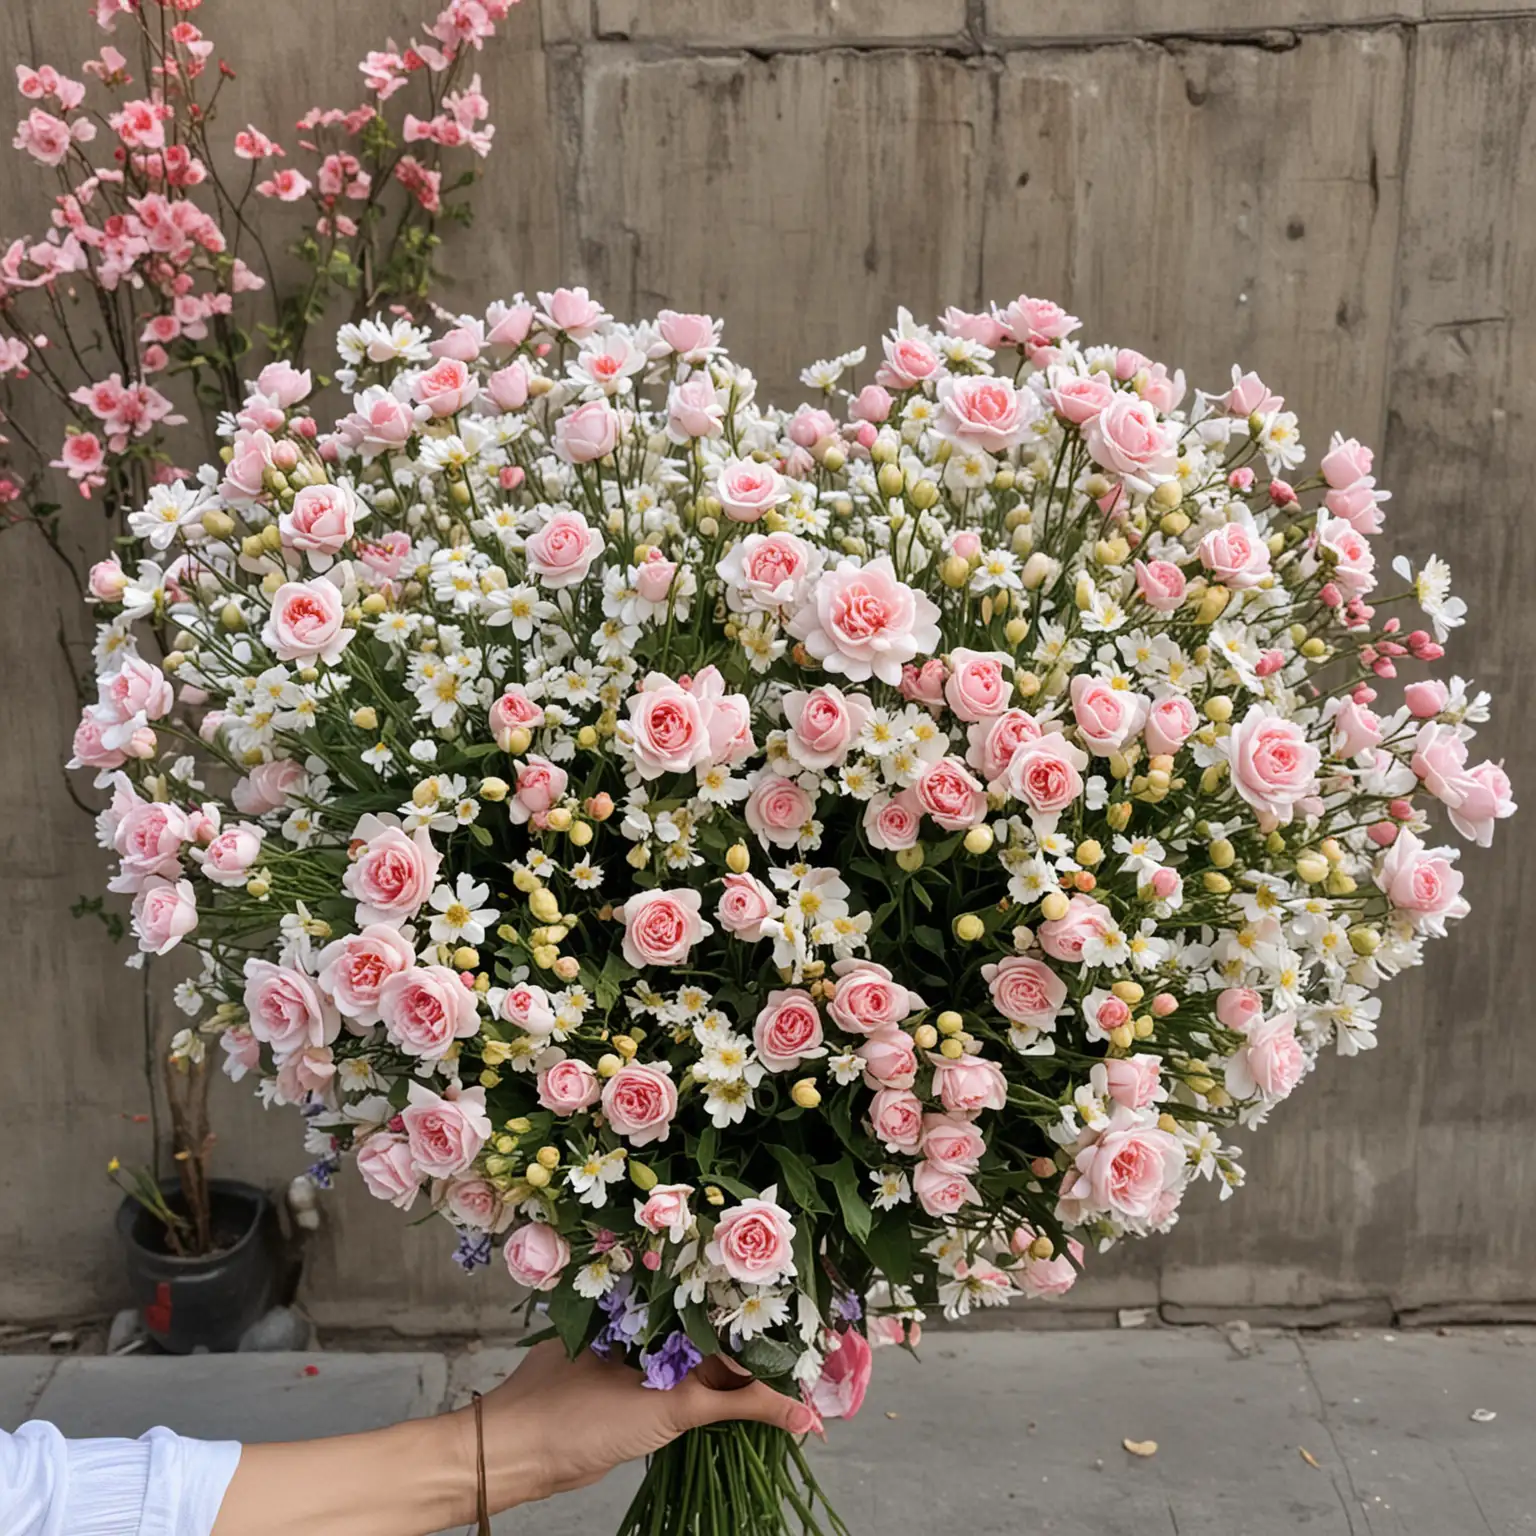 come to Kunming dance, there are more beautiful flowers here, I have picked them for you with heart, you do not need to smell fragrance without rest